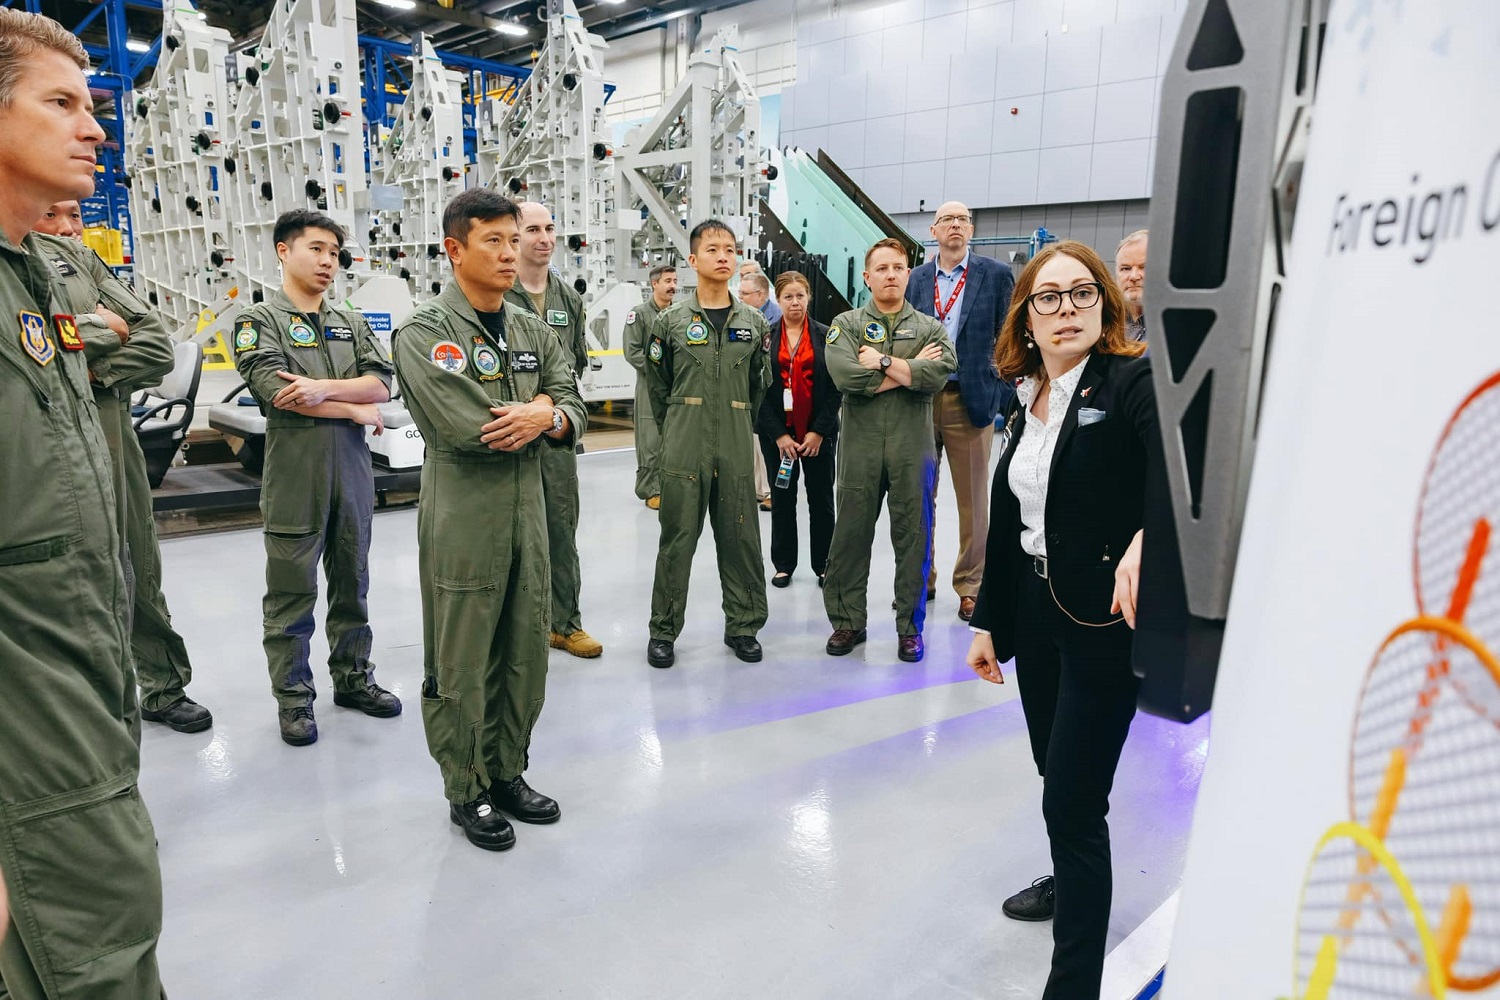 RSAF team during visited in the Lockheed Martin’s F-35 facility